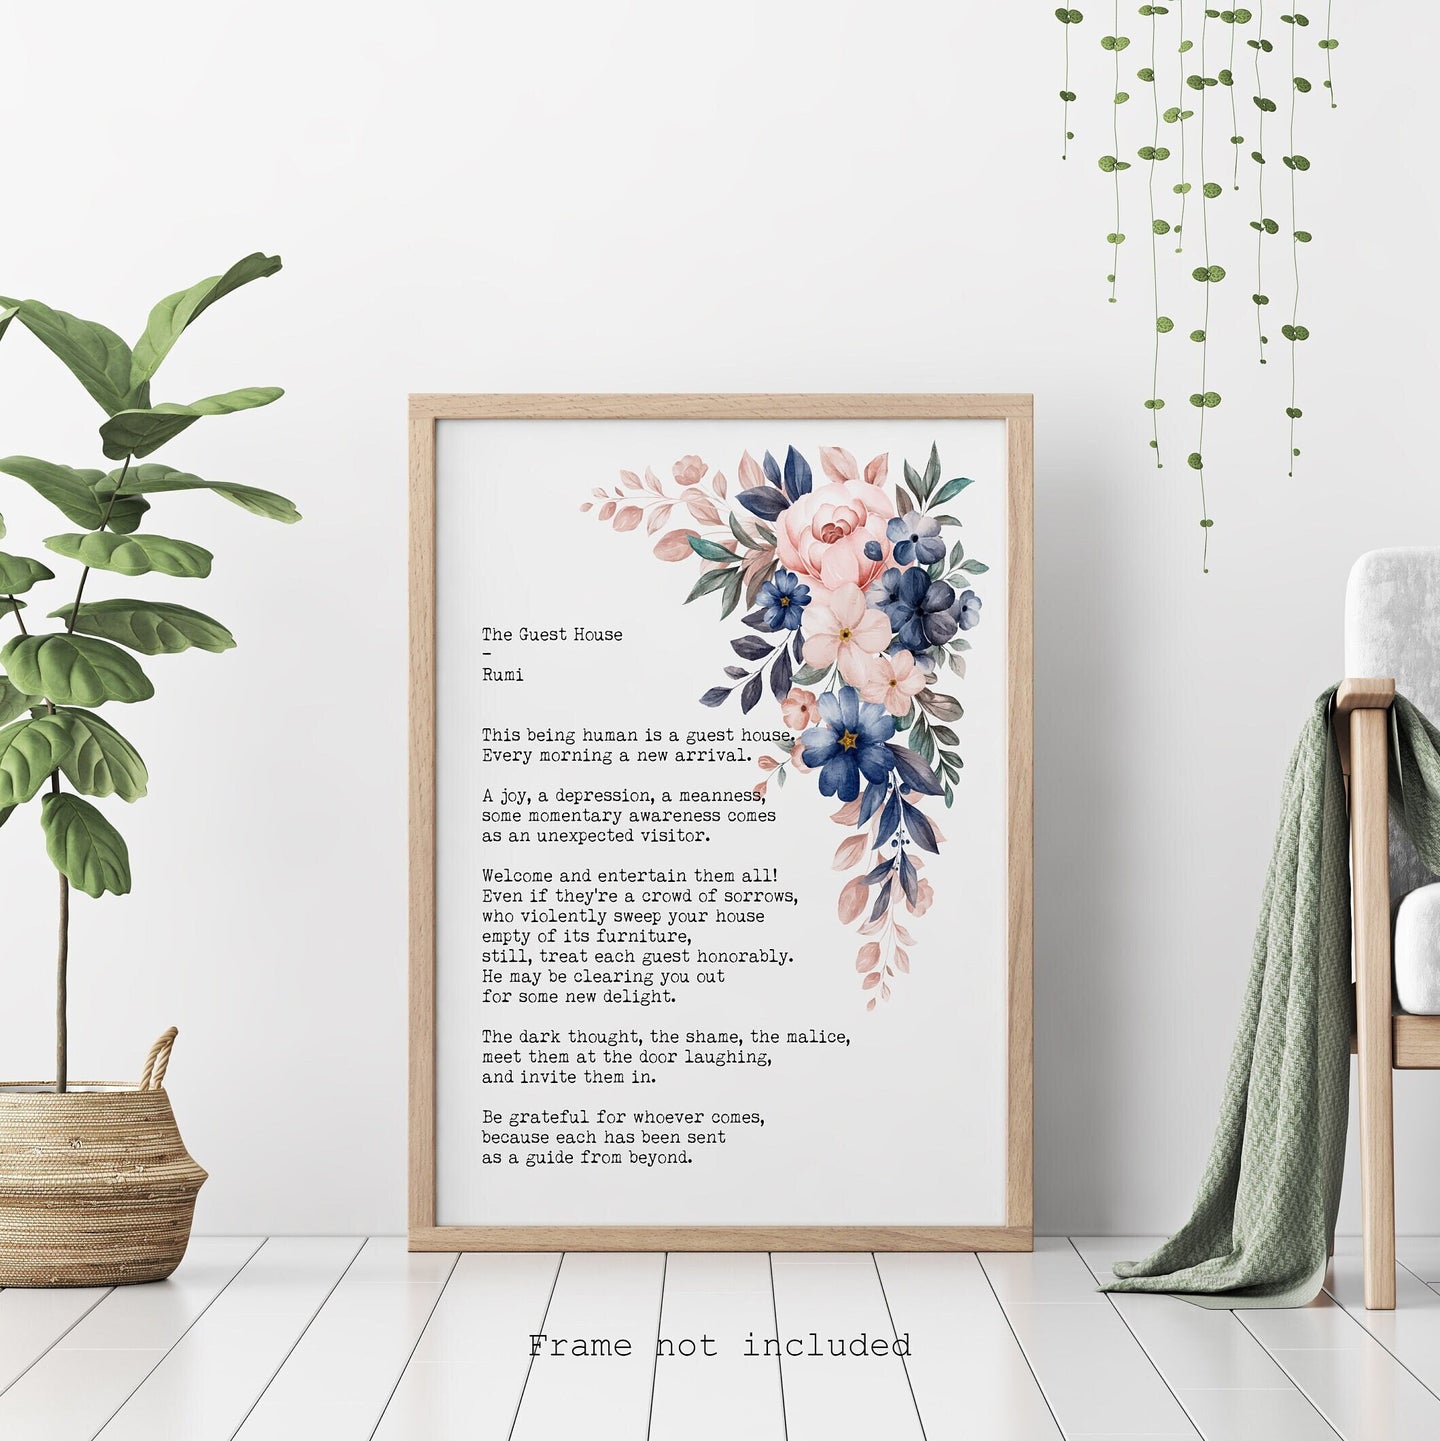 Rumi Quote - The Guest House Poem - Rumi Quote The Guest House Poem by Rumi Inspiring Poem Guest House Decor - Physical Art Print